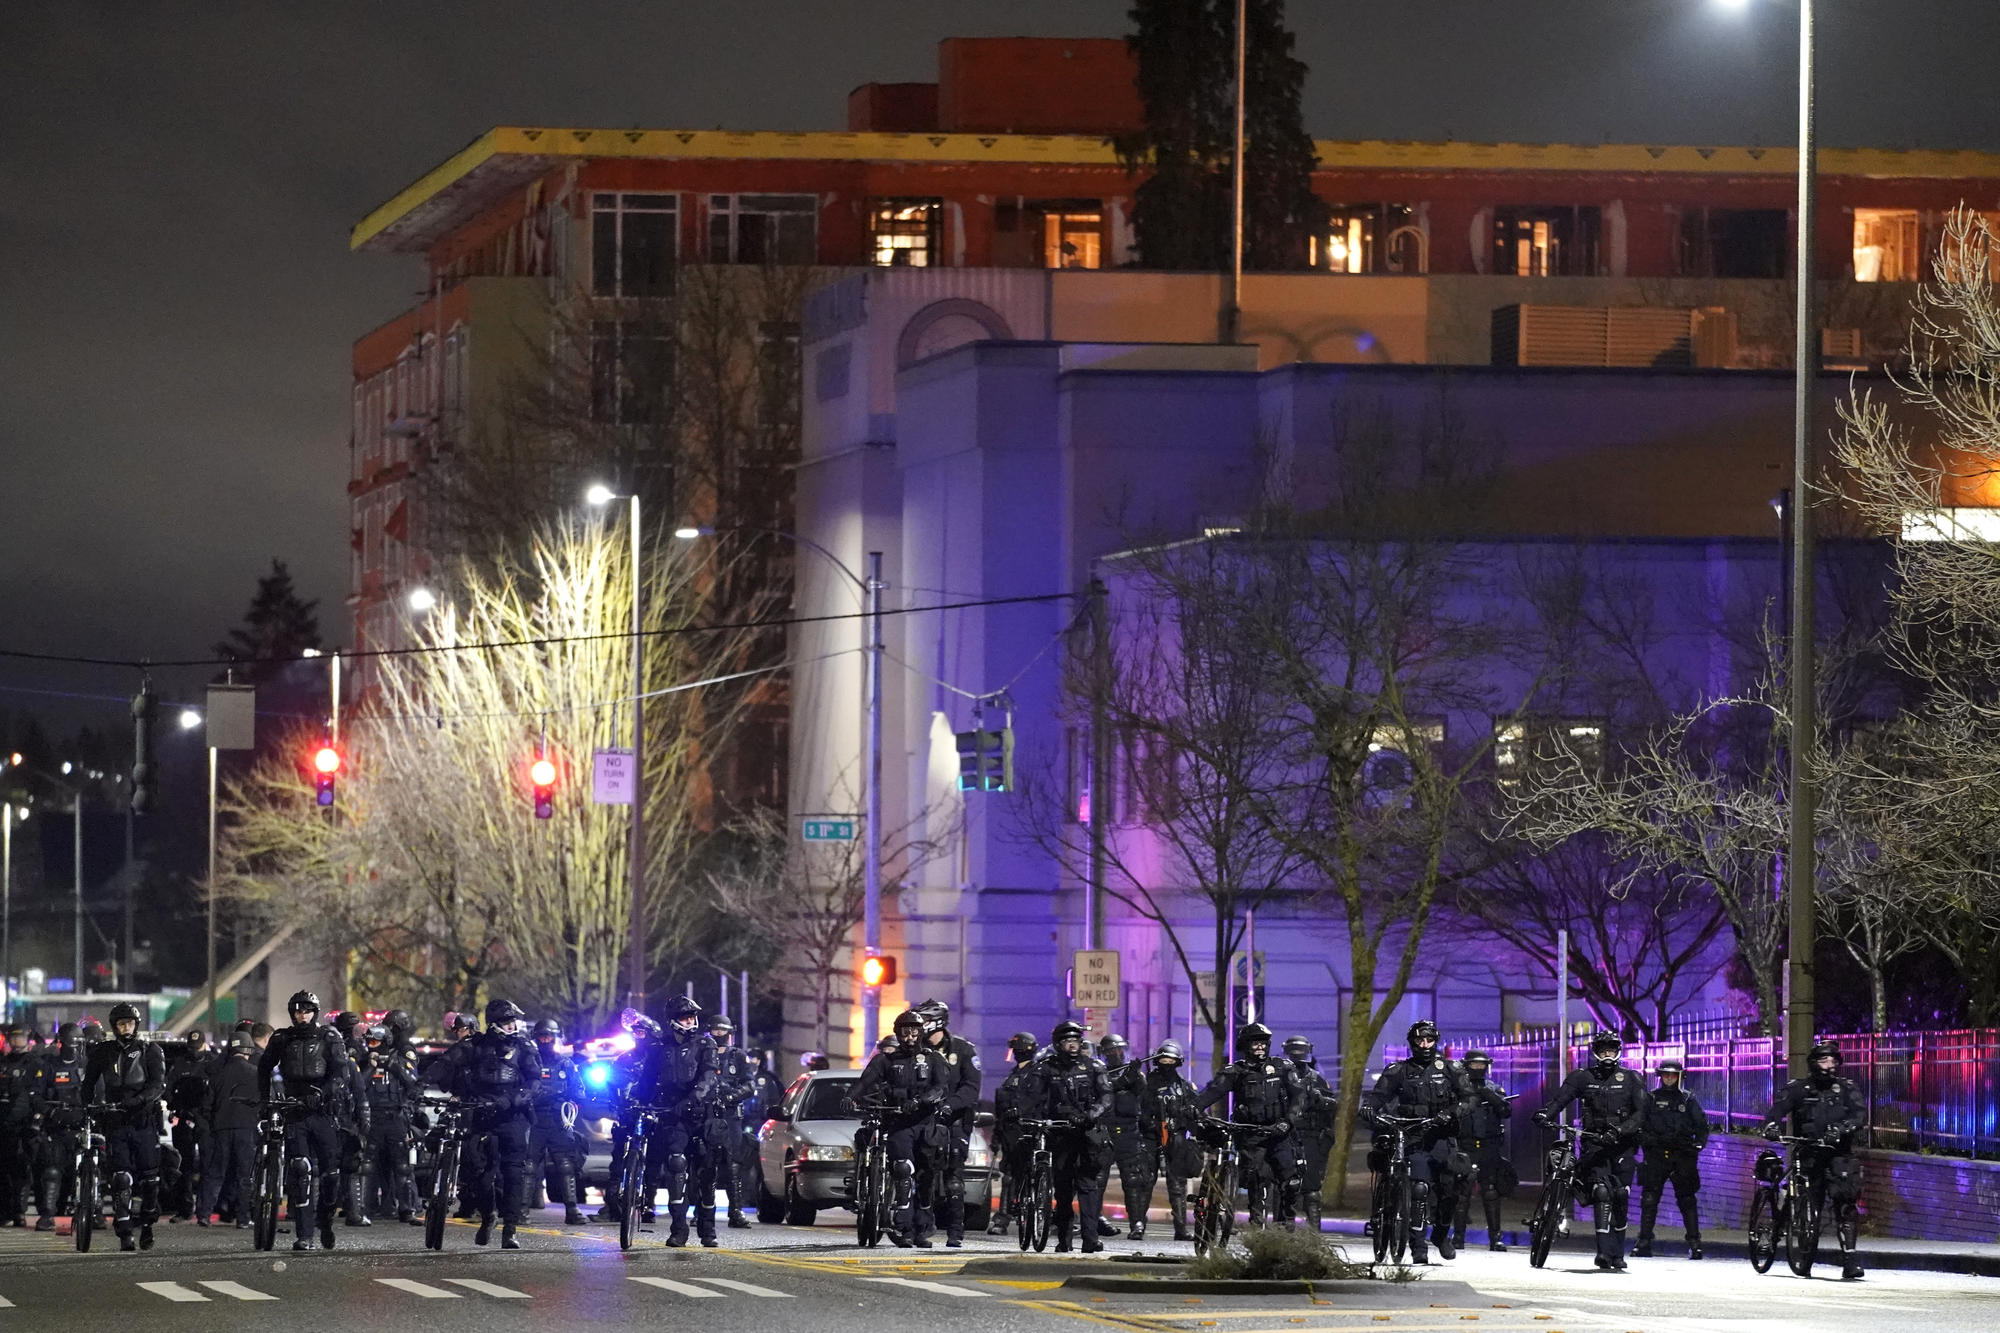 A line of police officers on a street with a building behind them